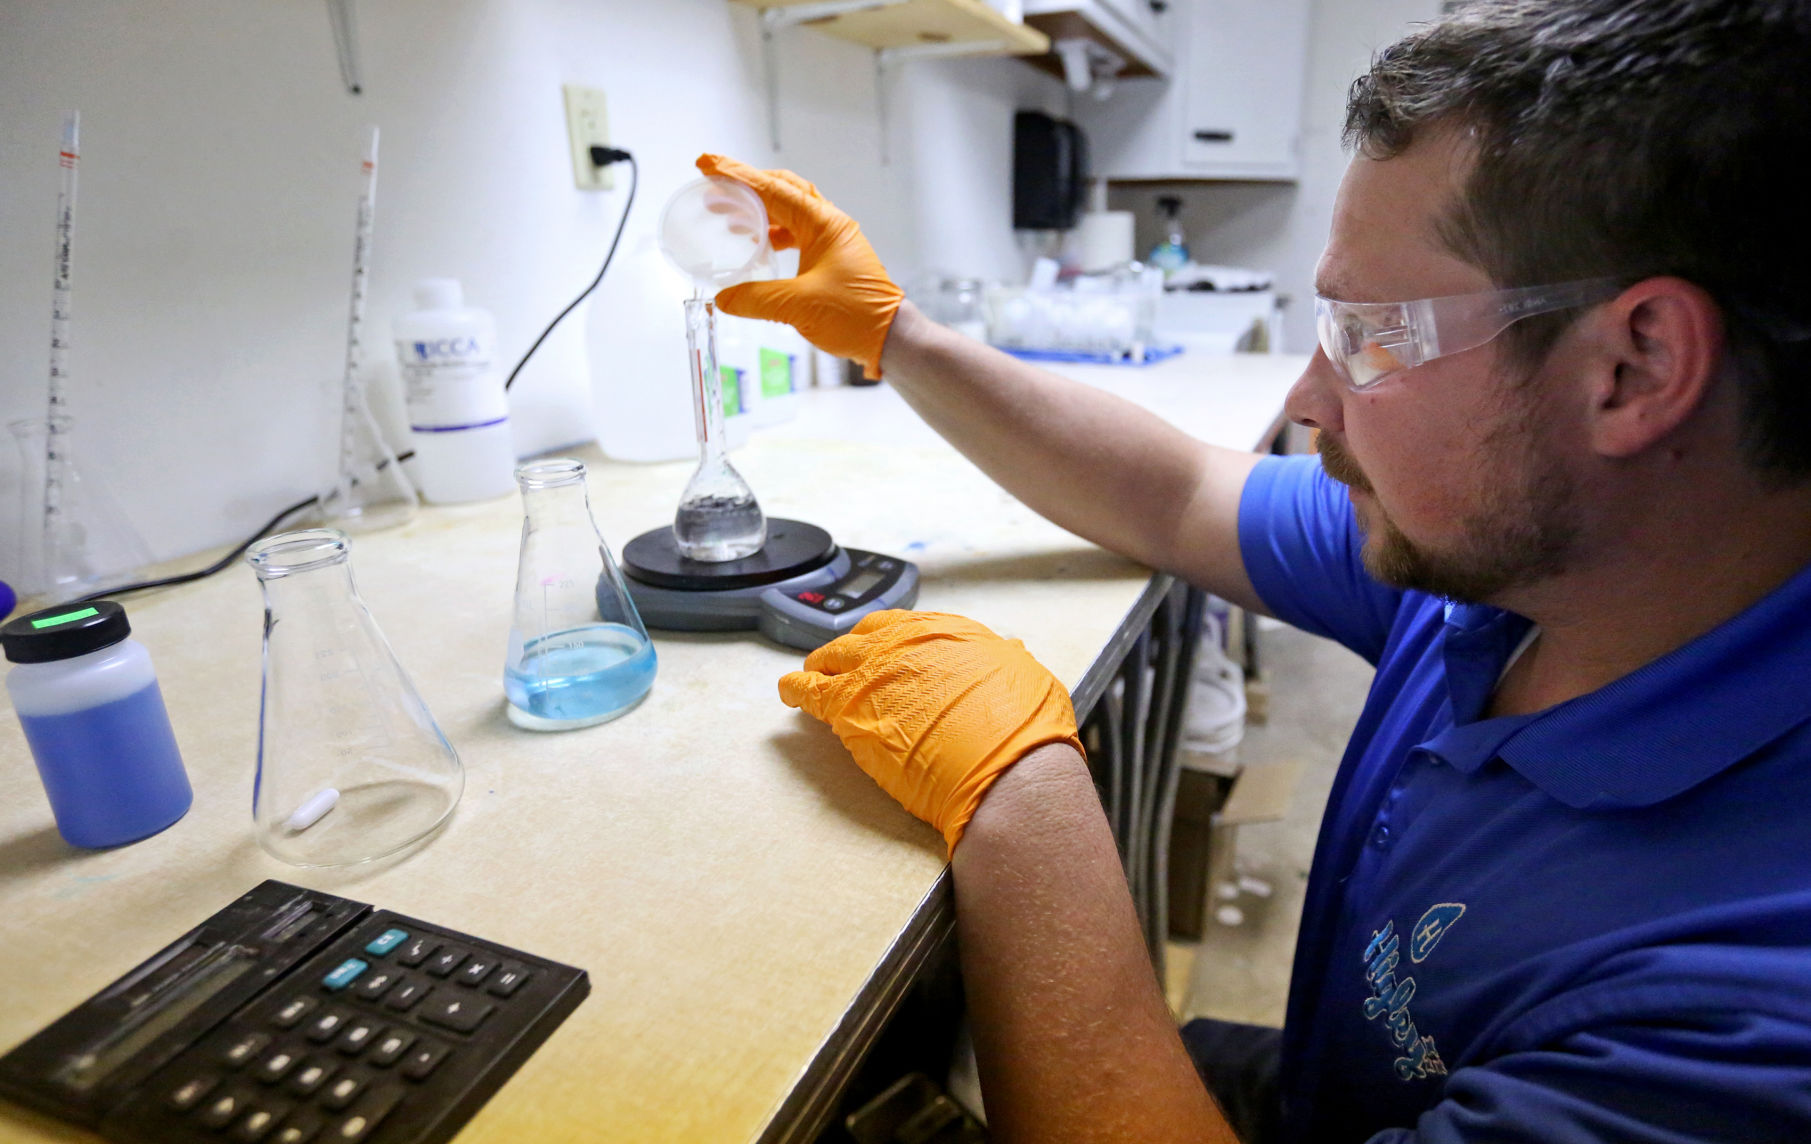 Higley Industries co-owner Lance Hummel runs a test on a sample. PHOTO CREDIT: JESSICA REILLY